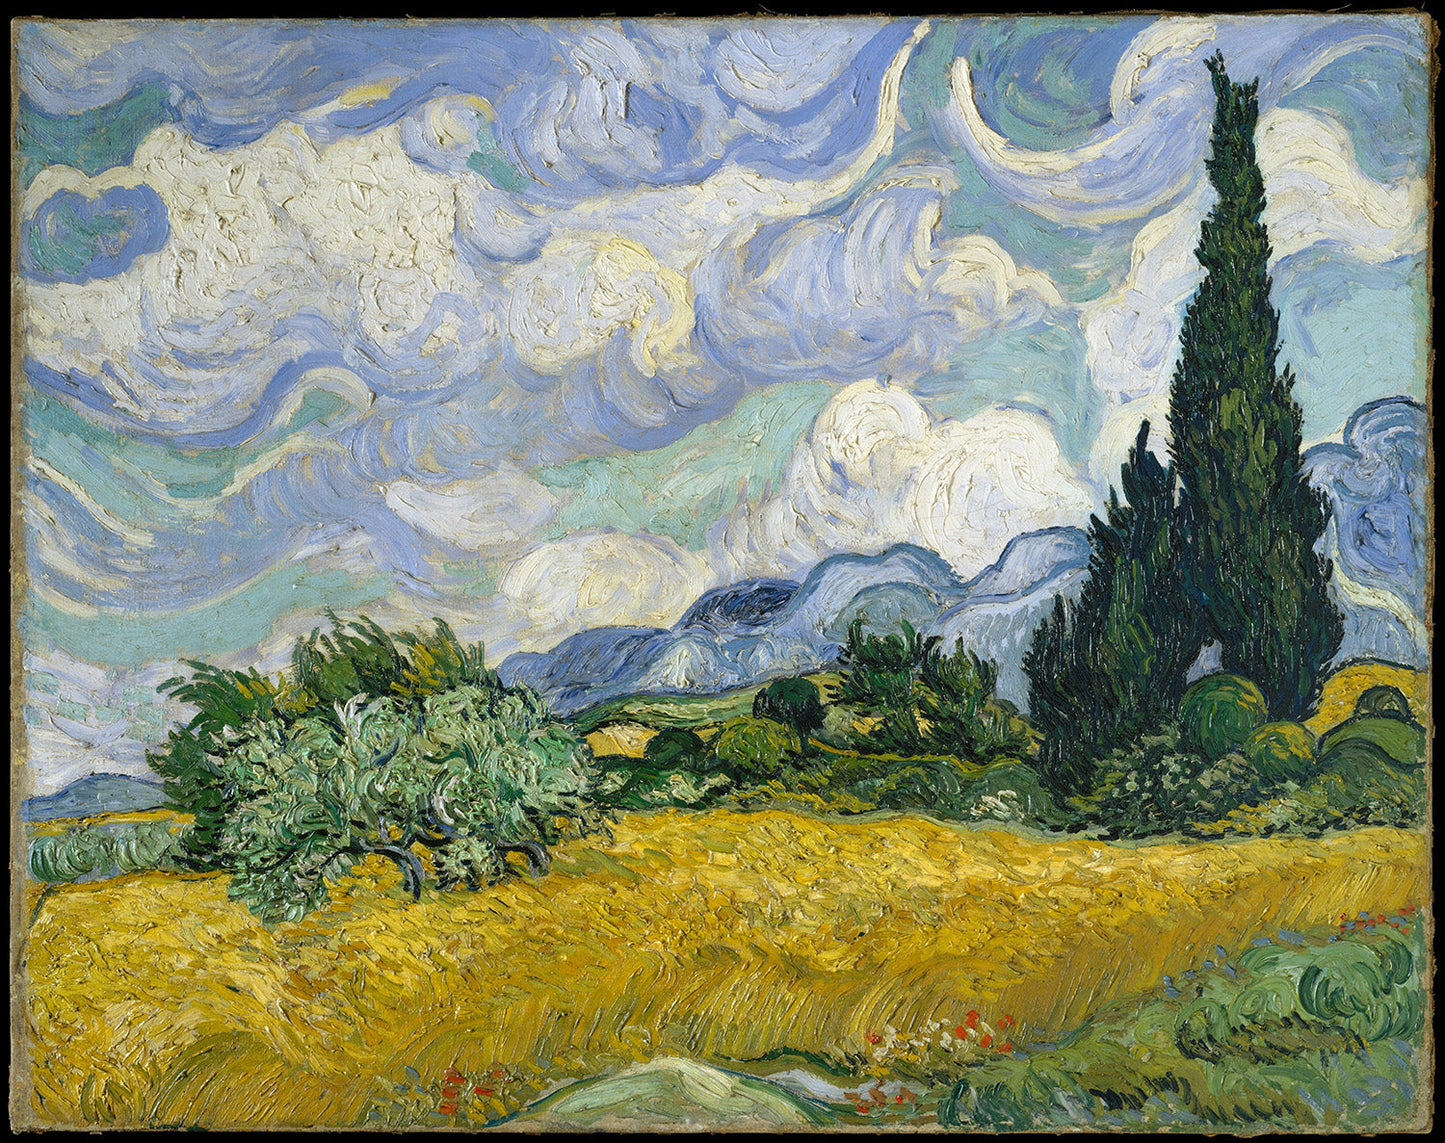 Wheat Field with Cypresses by Vincent van Gogh Art Print